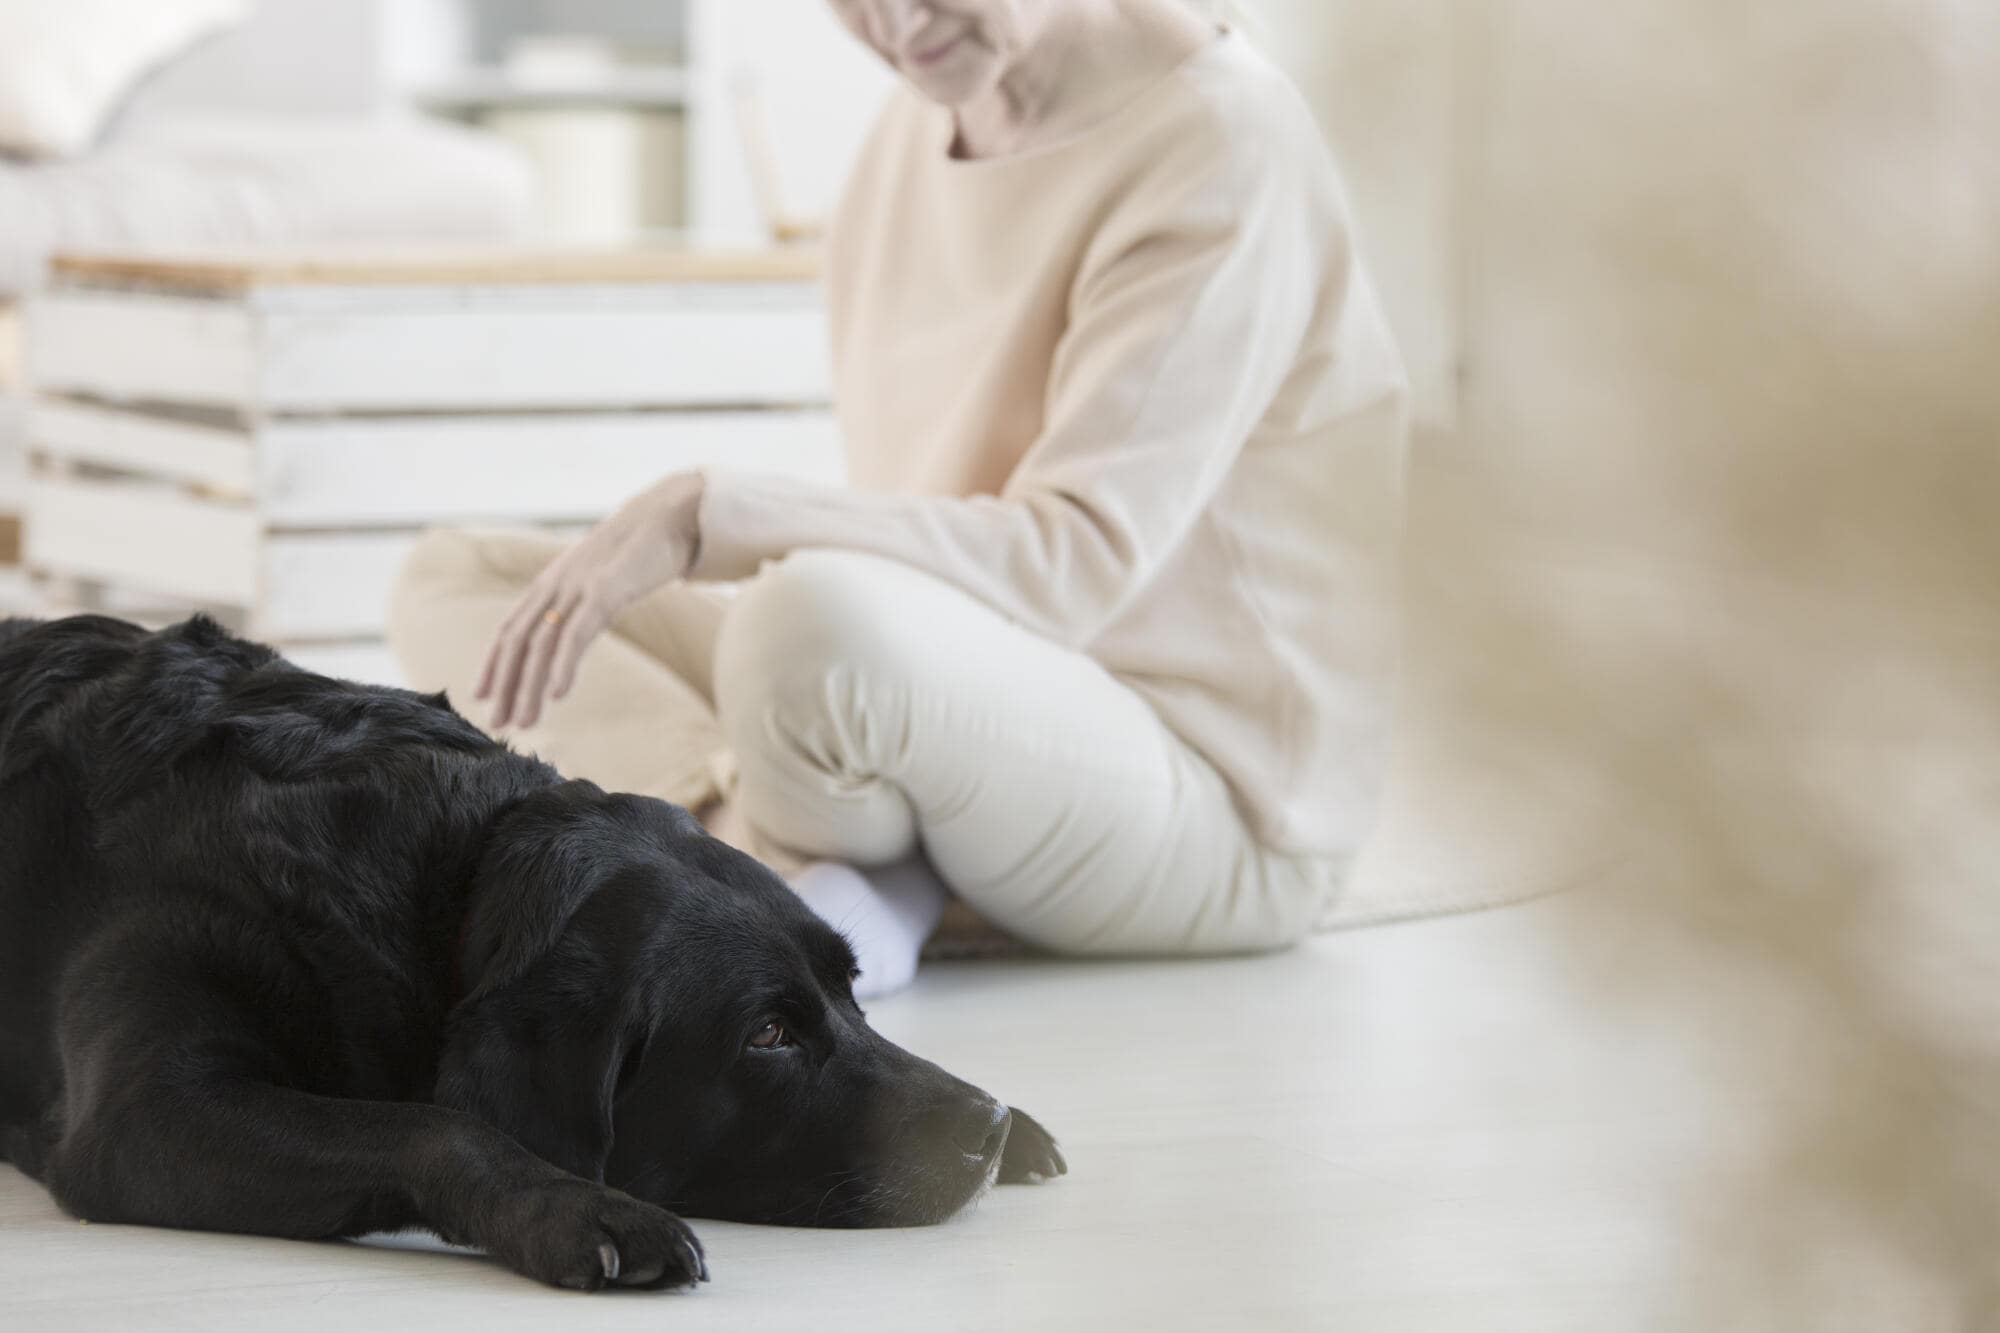 HOA Pet Policies: The Importance of Accommodating Support Animals